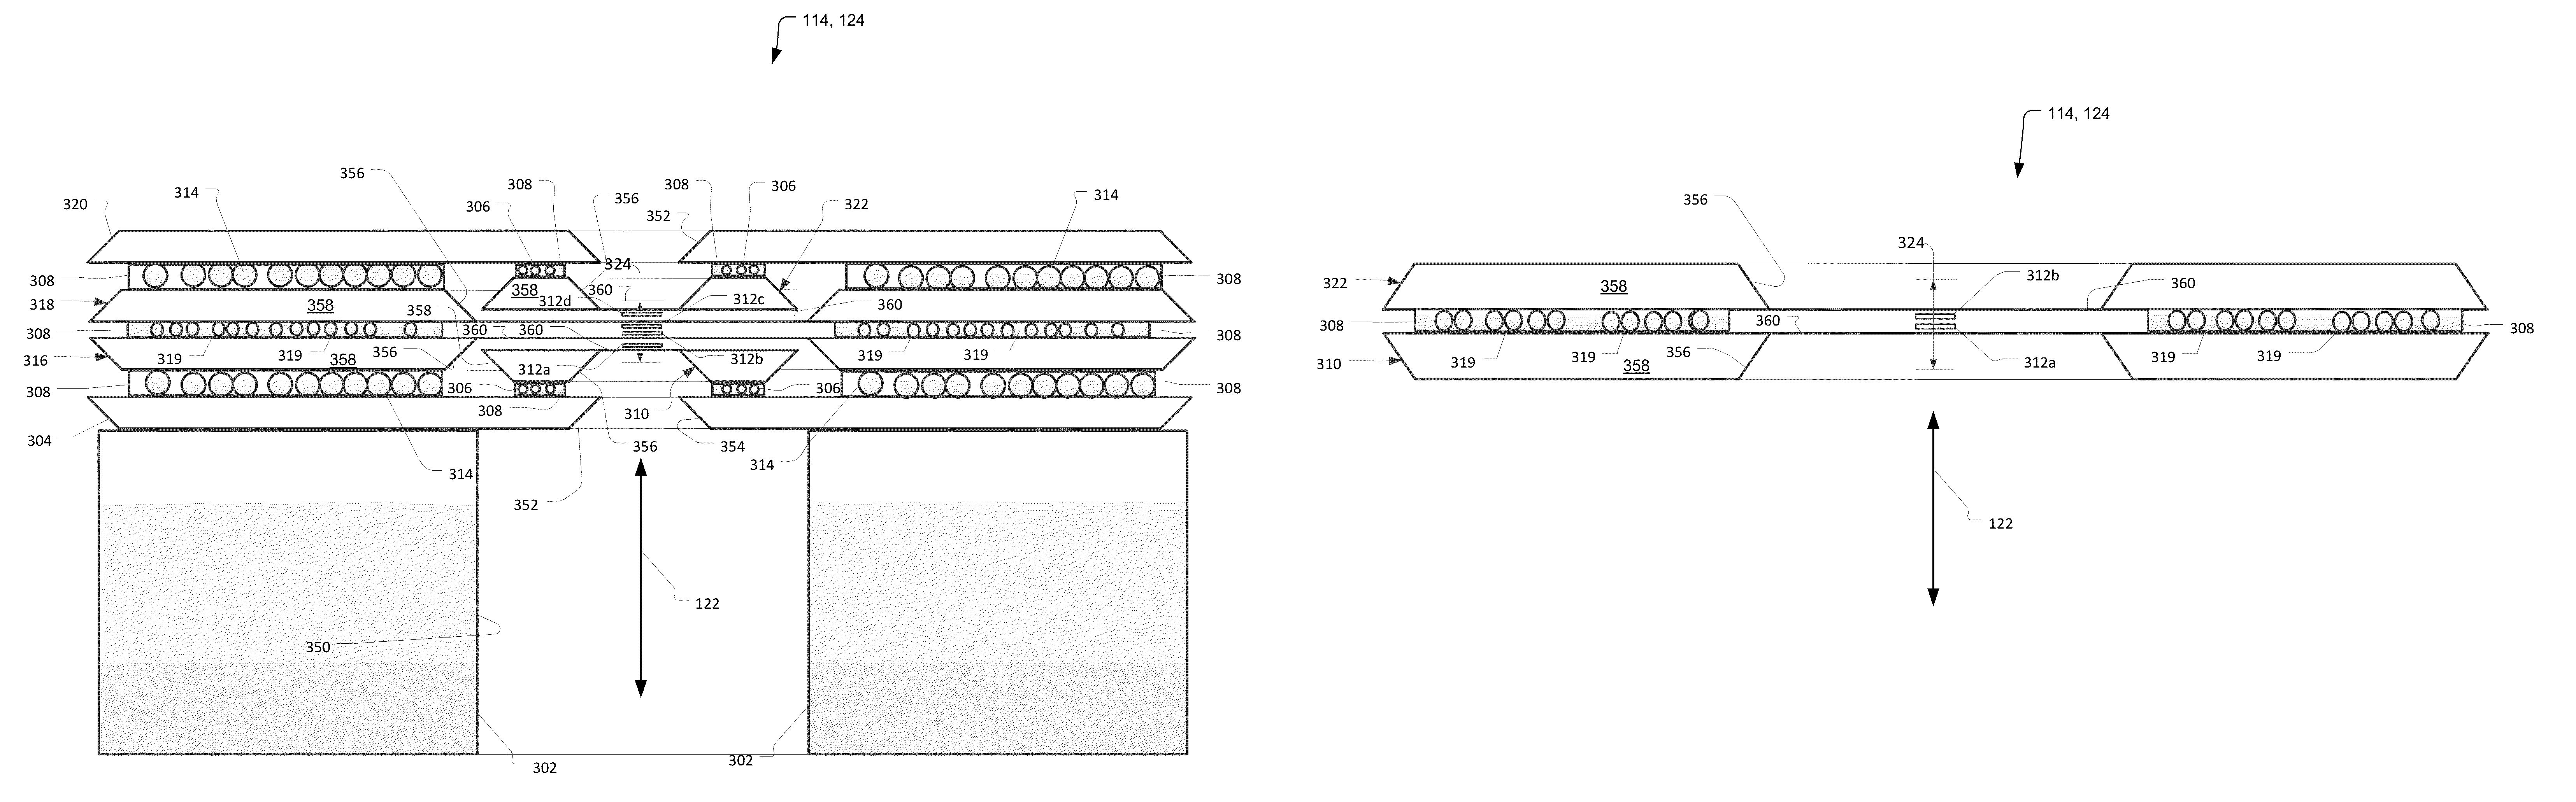 Compound x-ray lens having multiple aligned zone plates